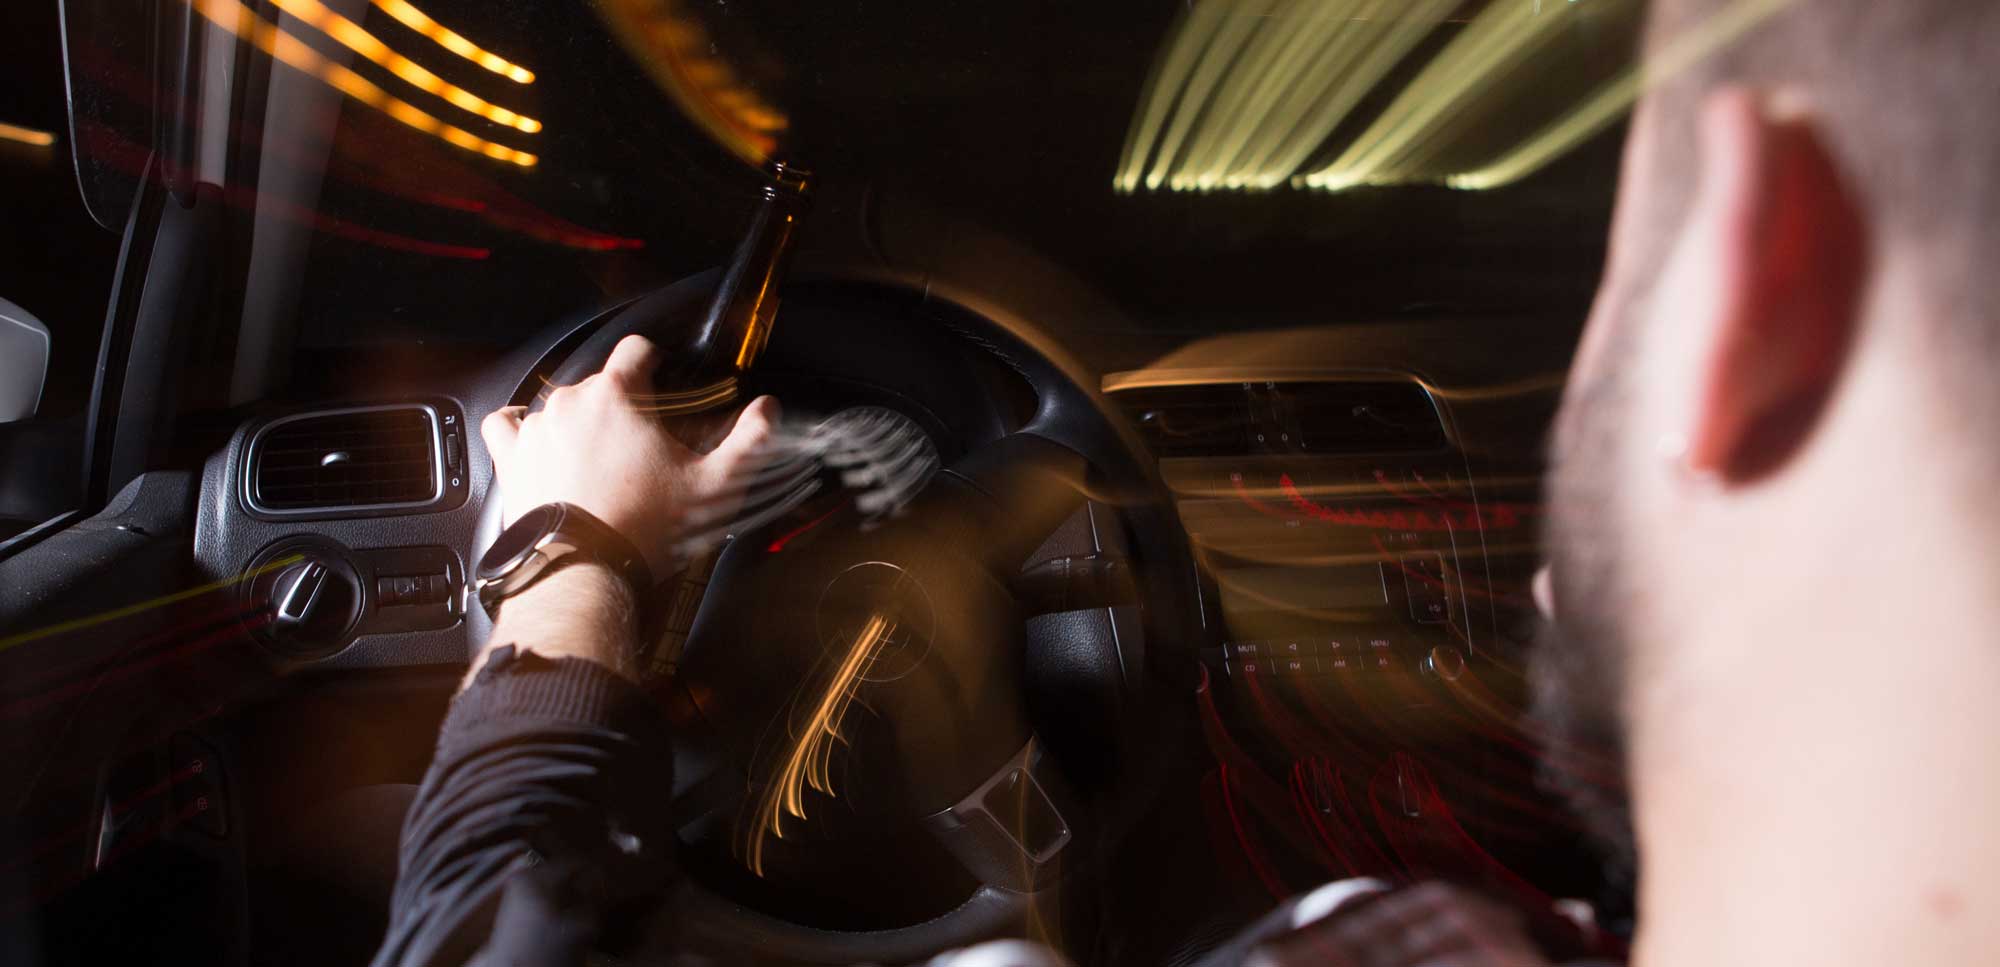 Man driving at night with a beer bottle in his hand not seeing clearly